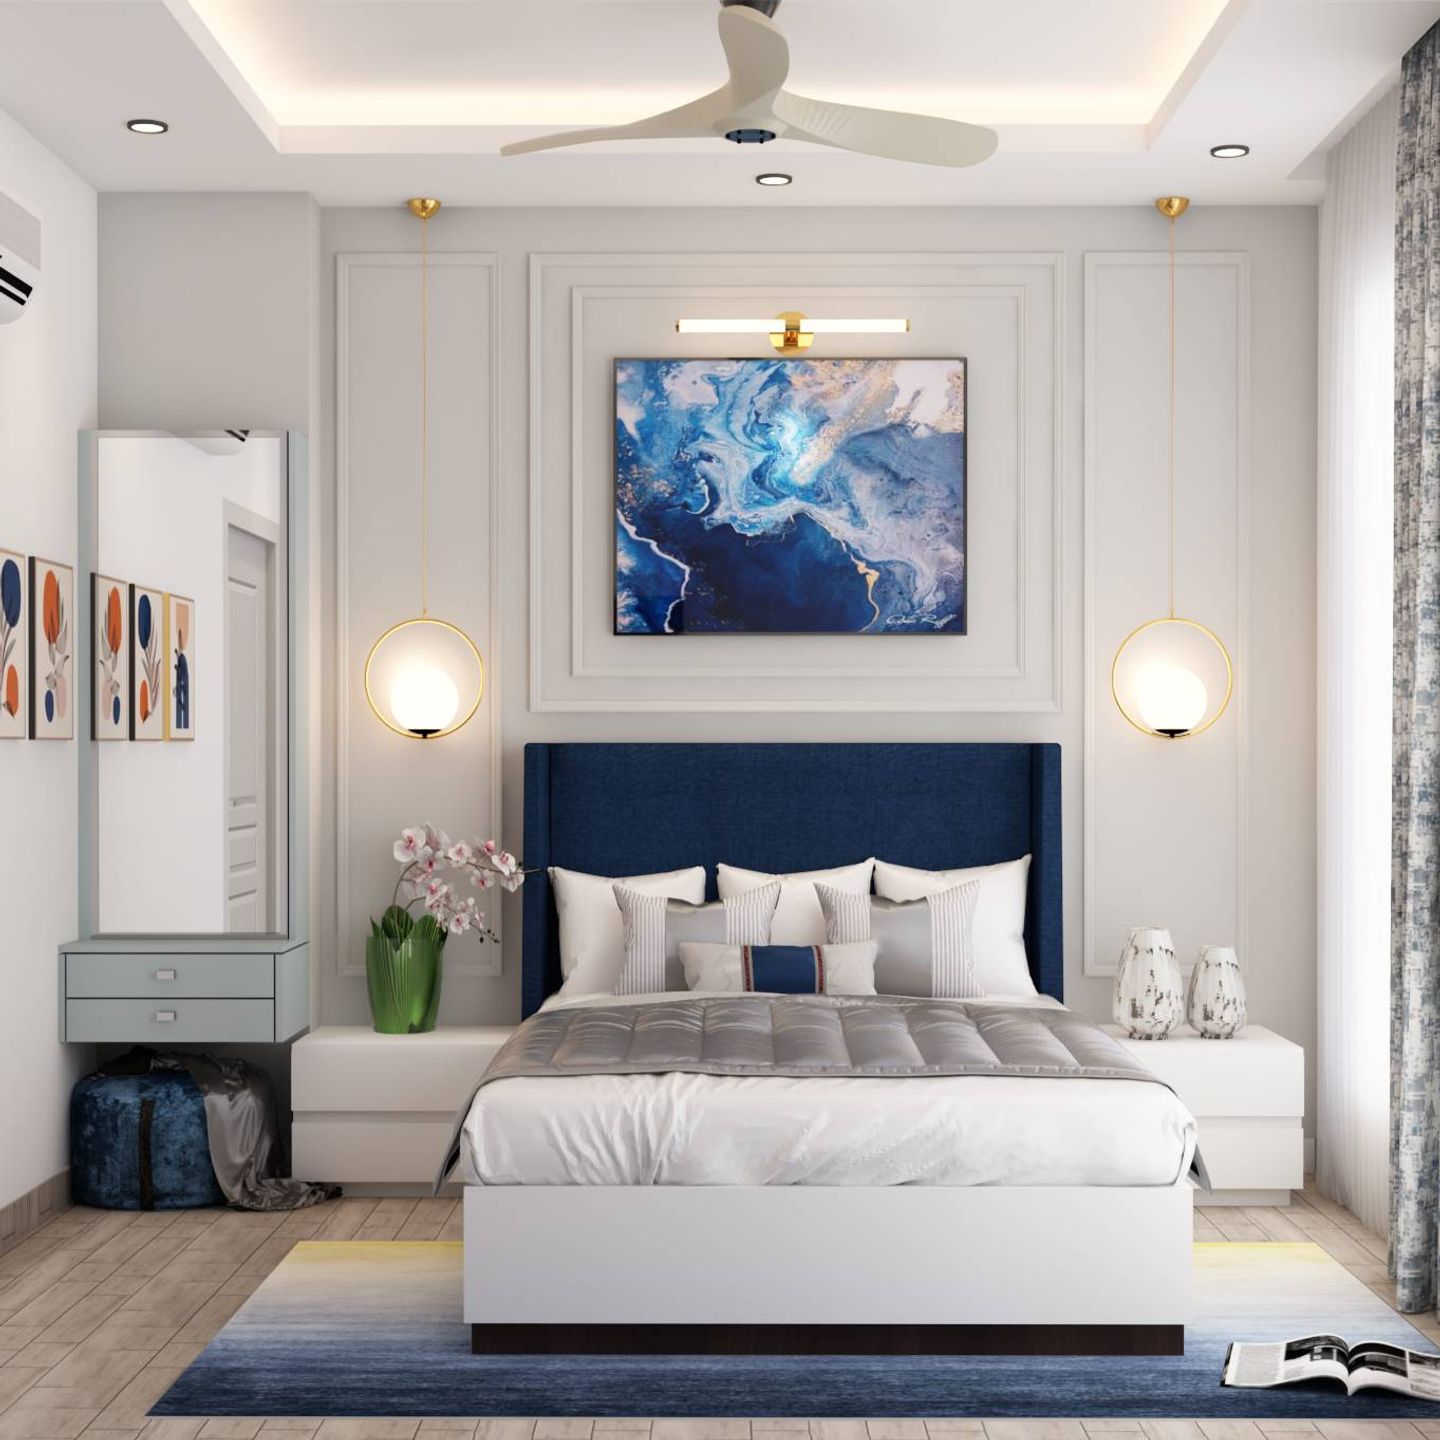 White And Blue Design For Guest Bedrooms - Livspace